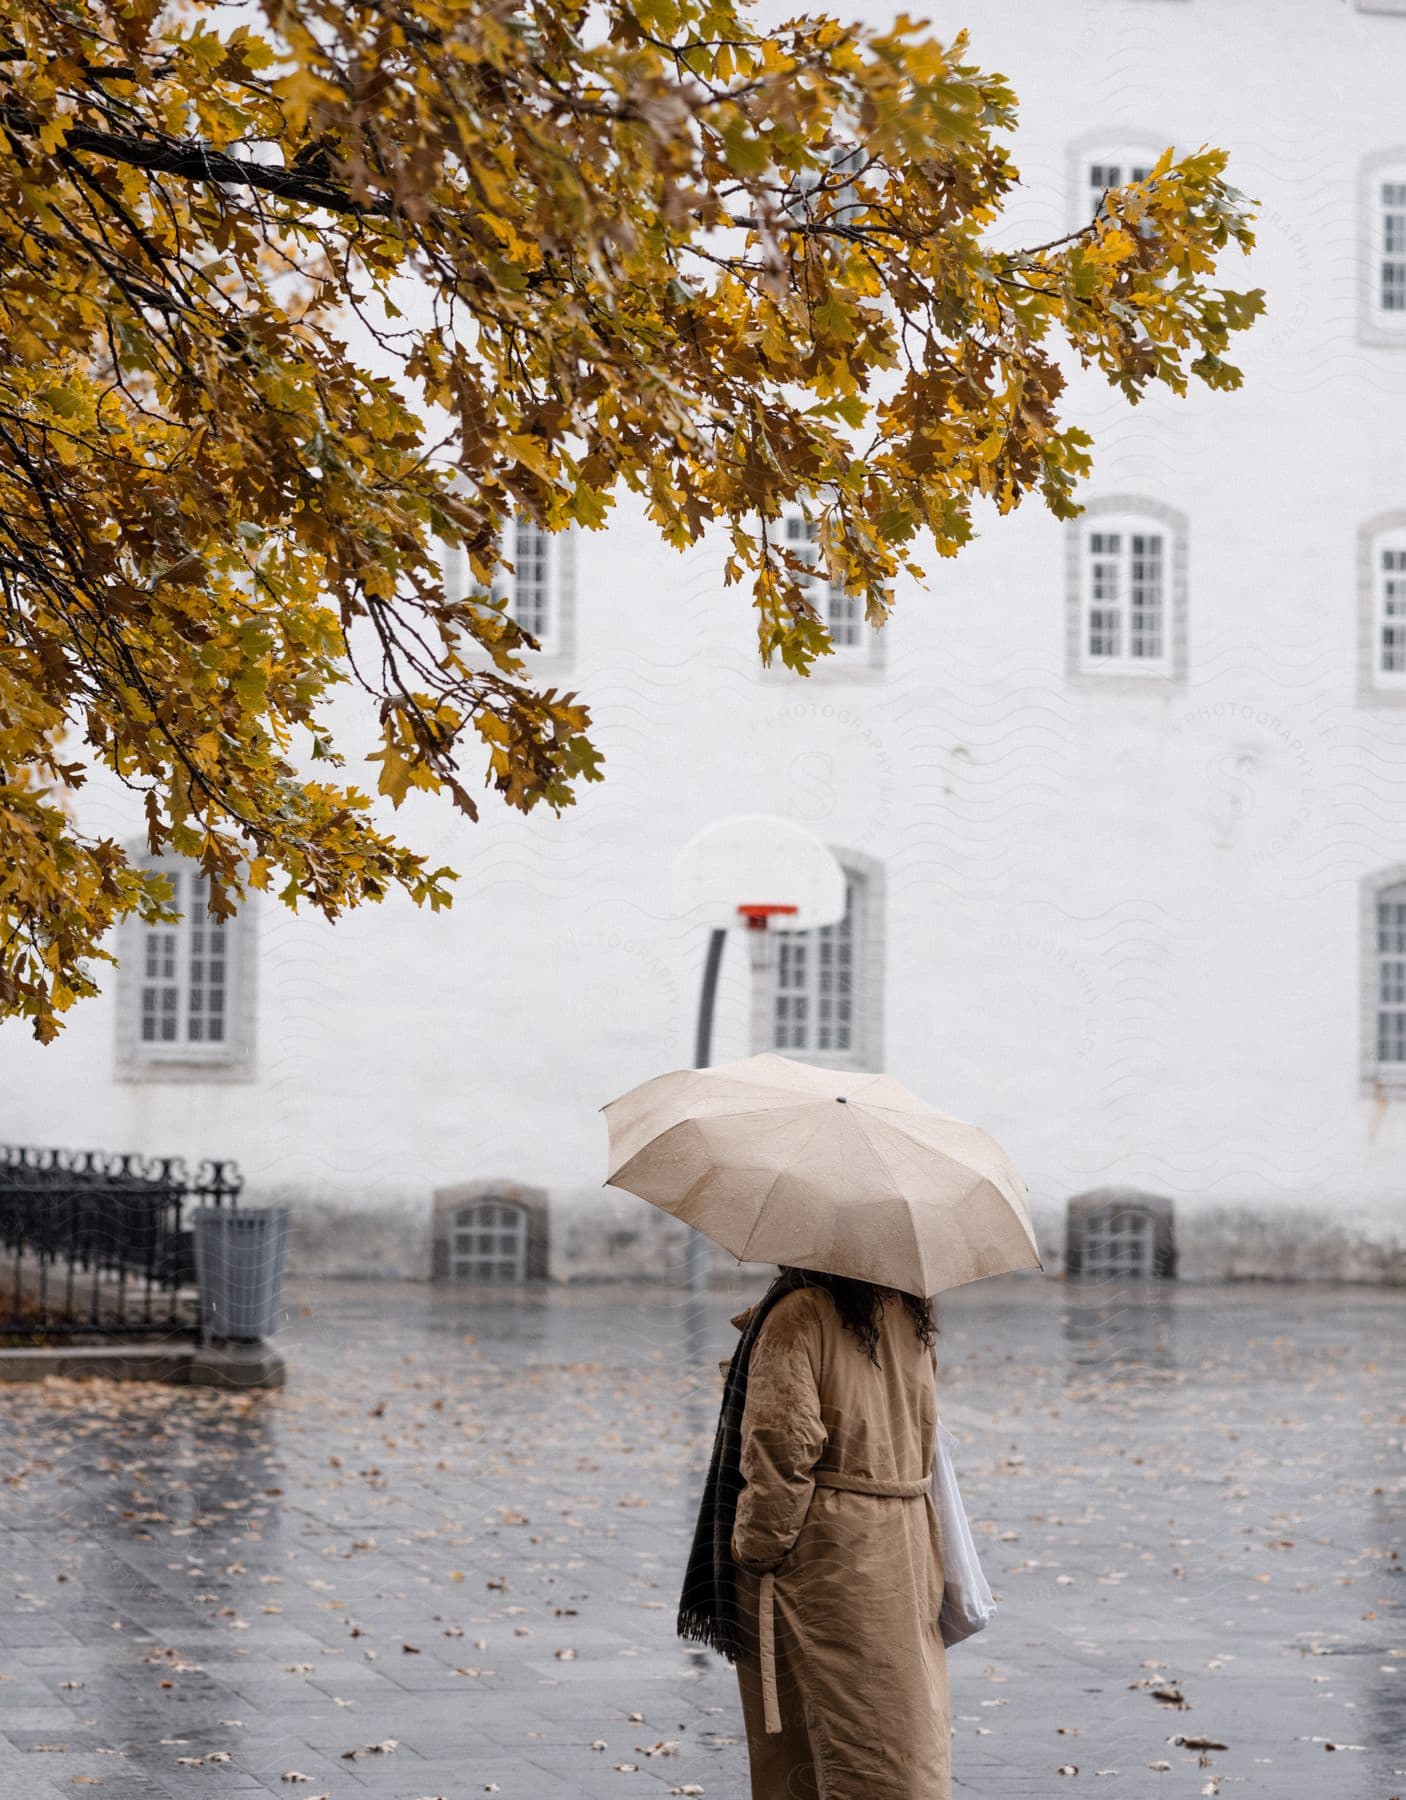 A woman looking on under an umbrella